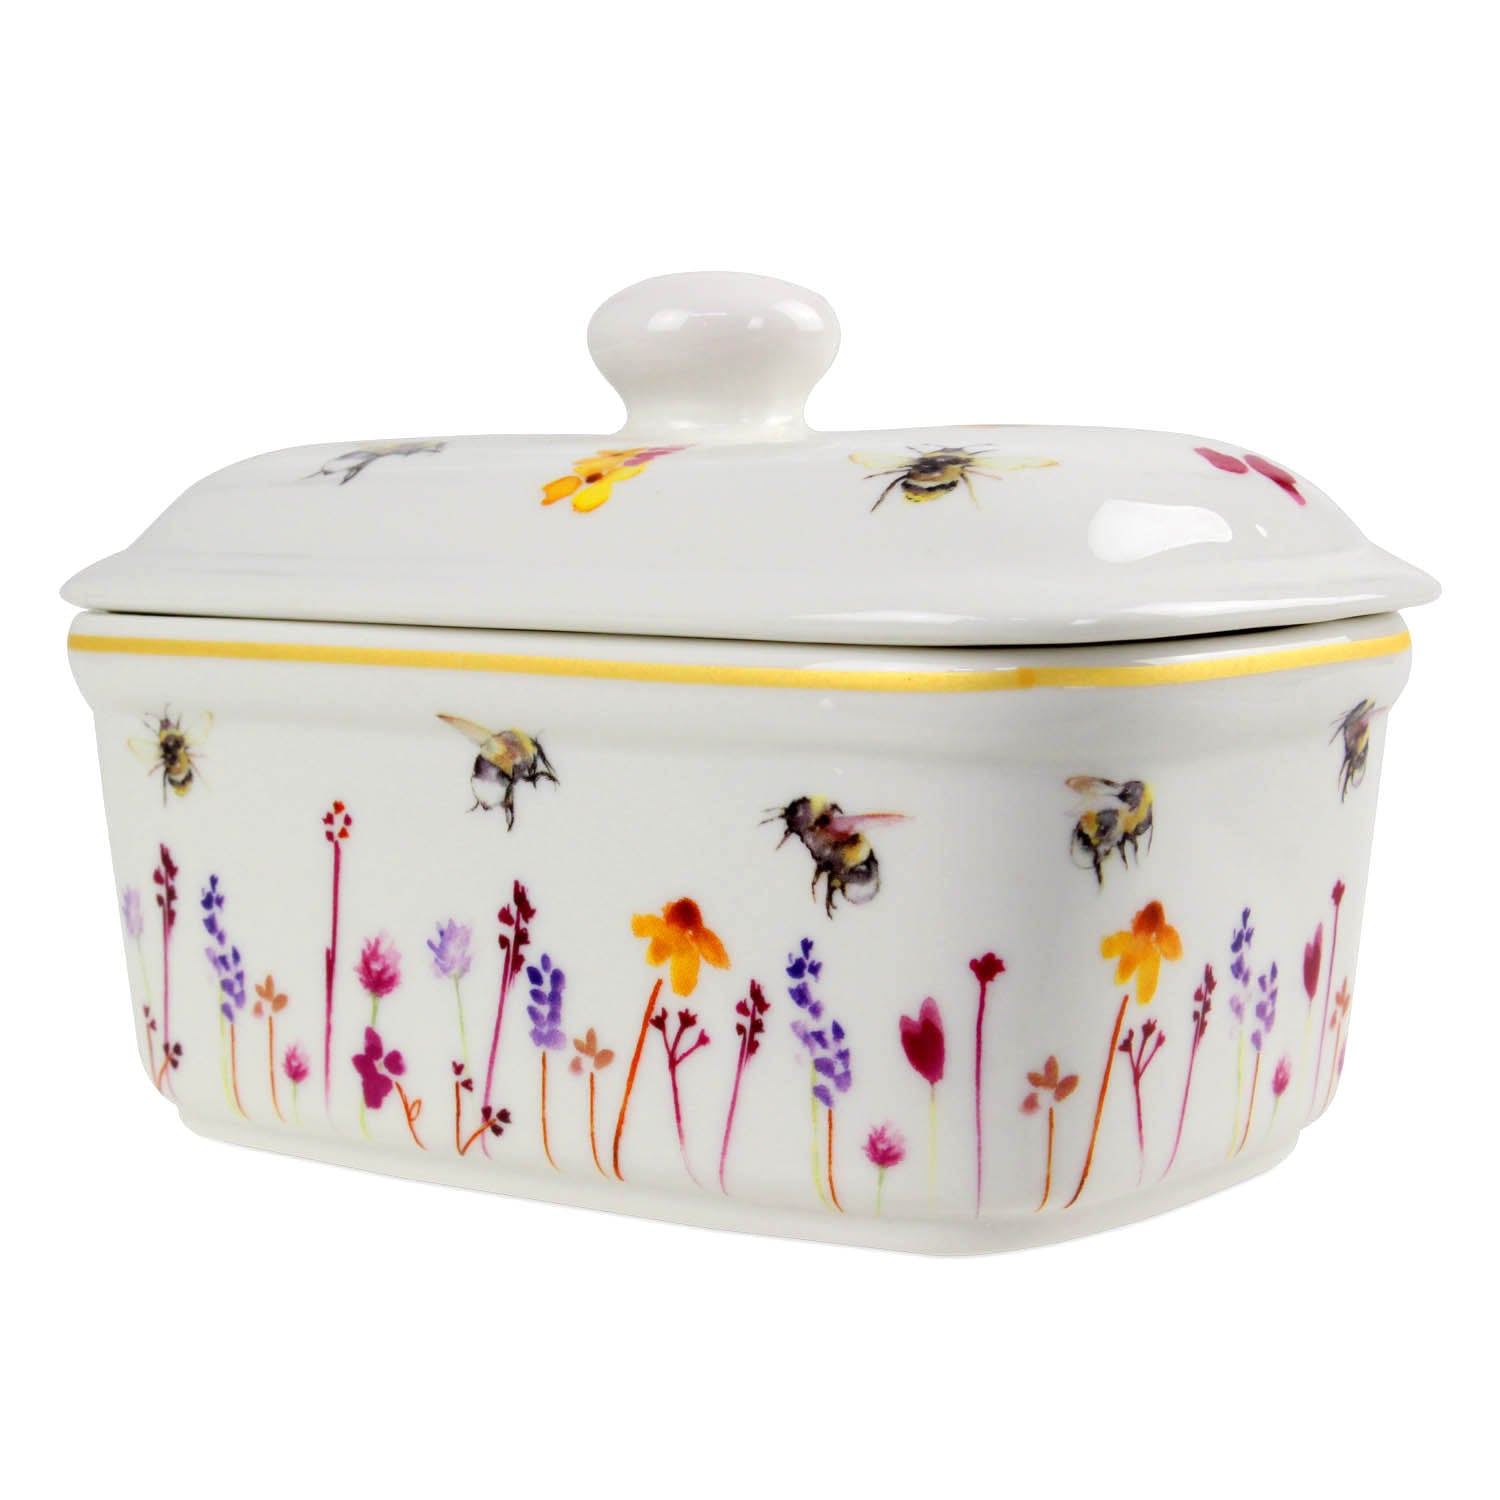 Bees & Flowers Ceramic Butter Dish with Lid